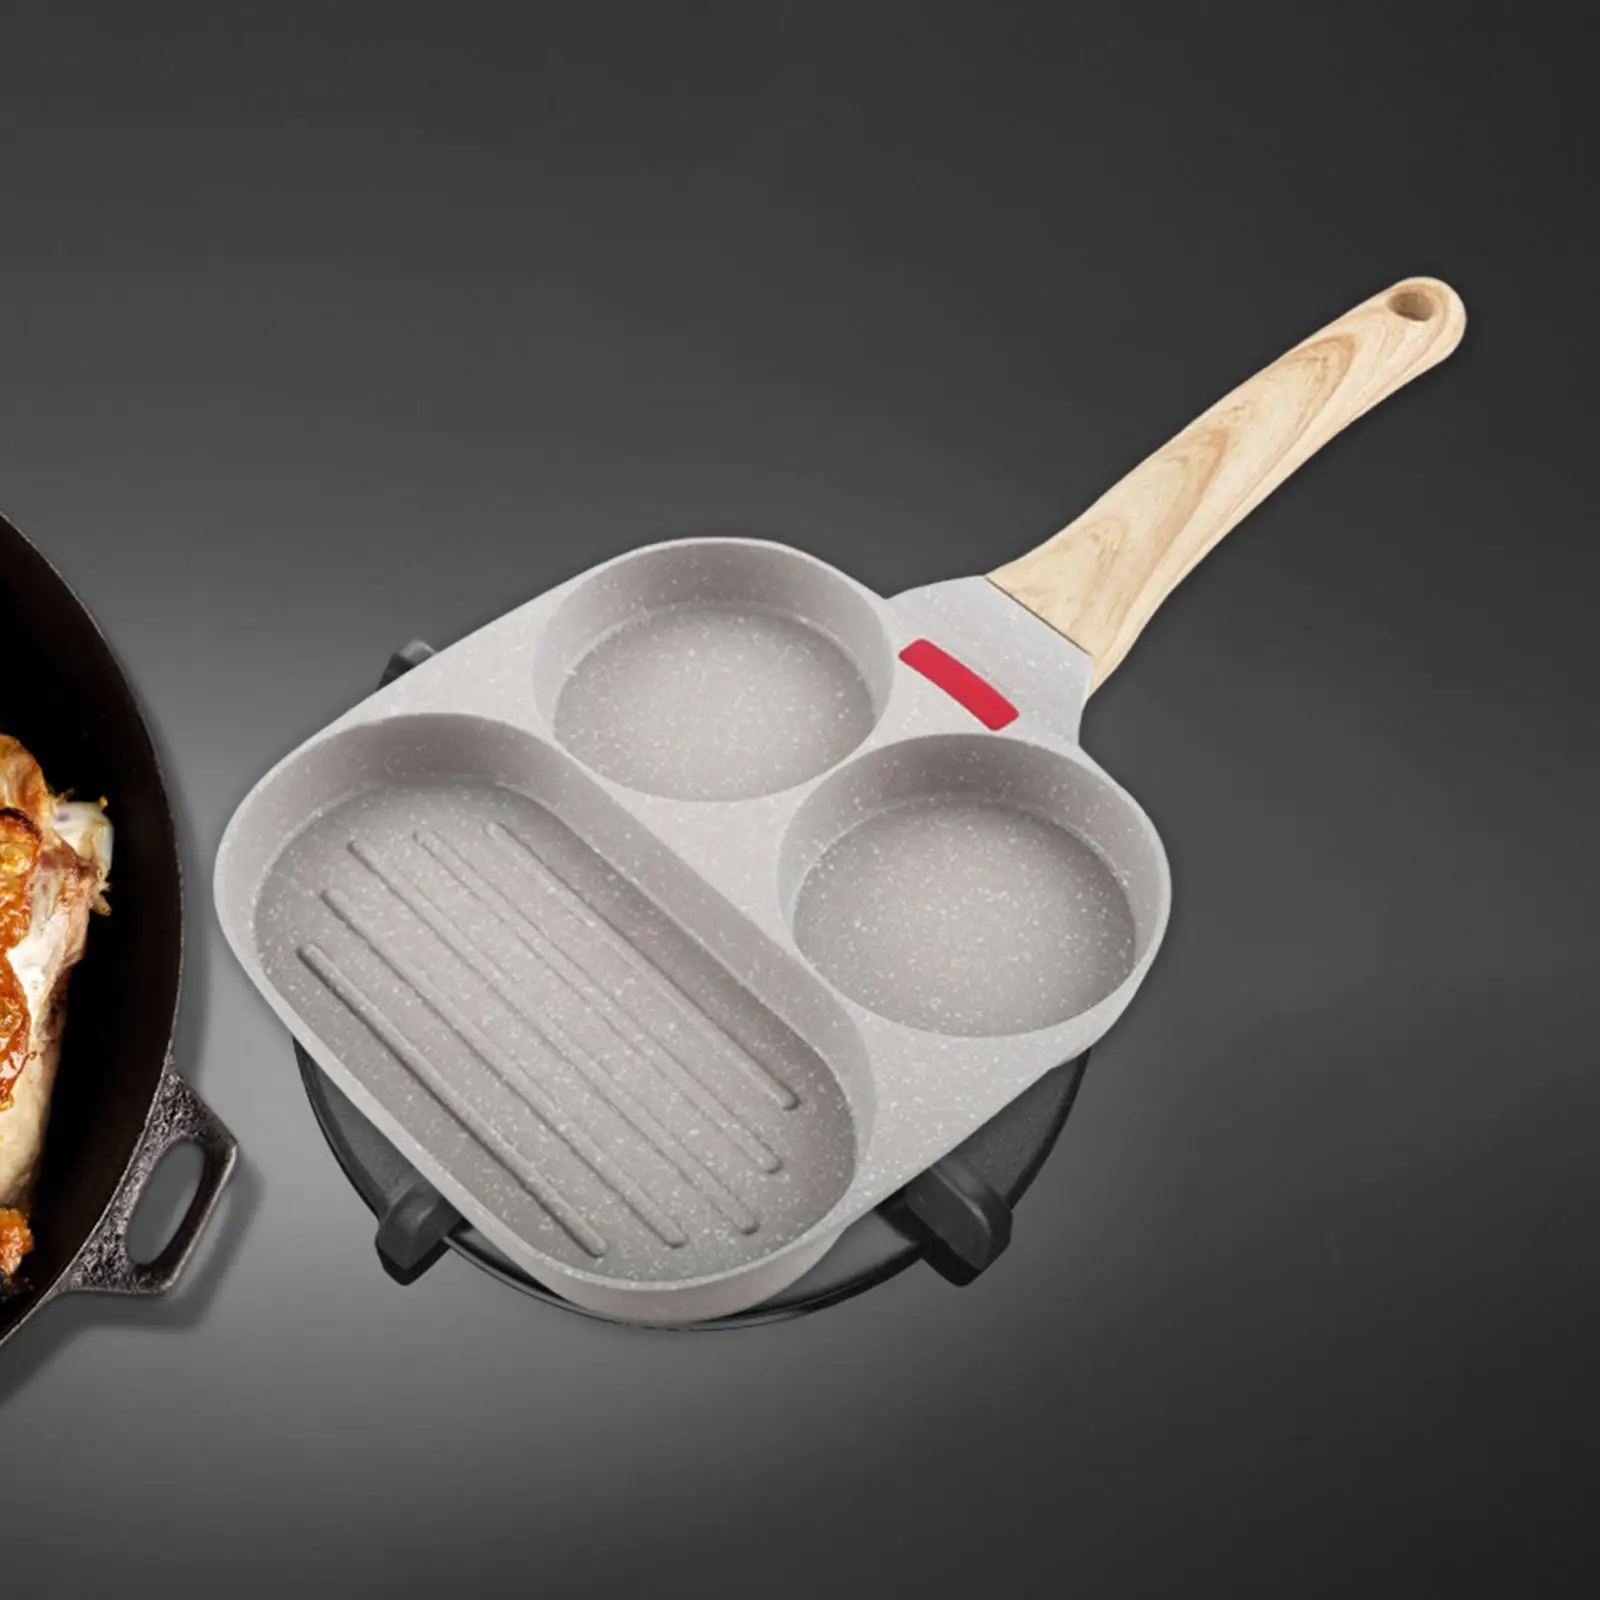 Fried Egg pans easy Clean with Anti Scald Handle 2 Holes Cooking Pan Omelet Pan for Burger Omelet Home Restaurant Breakfast